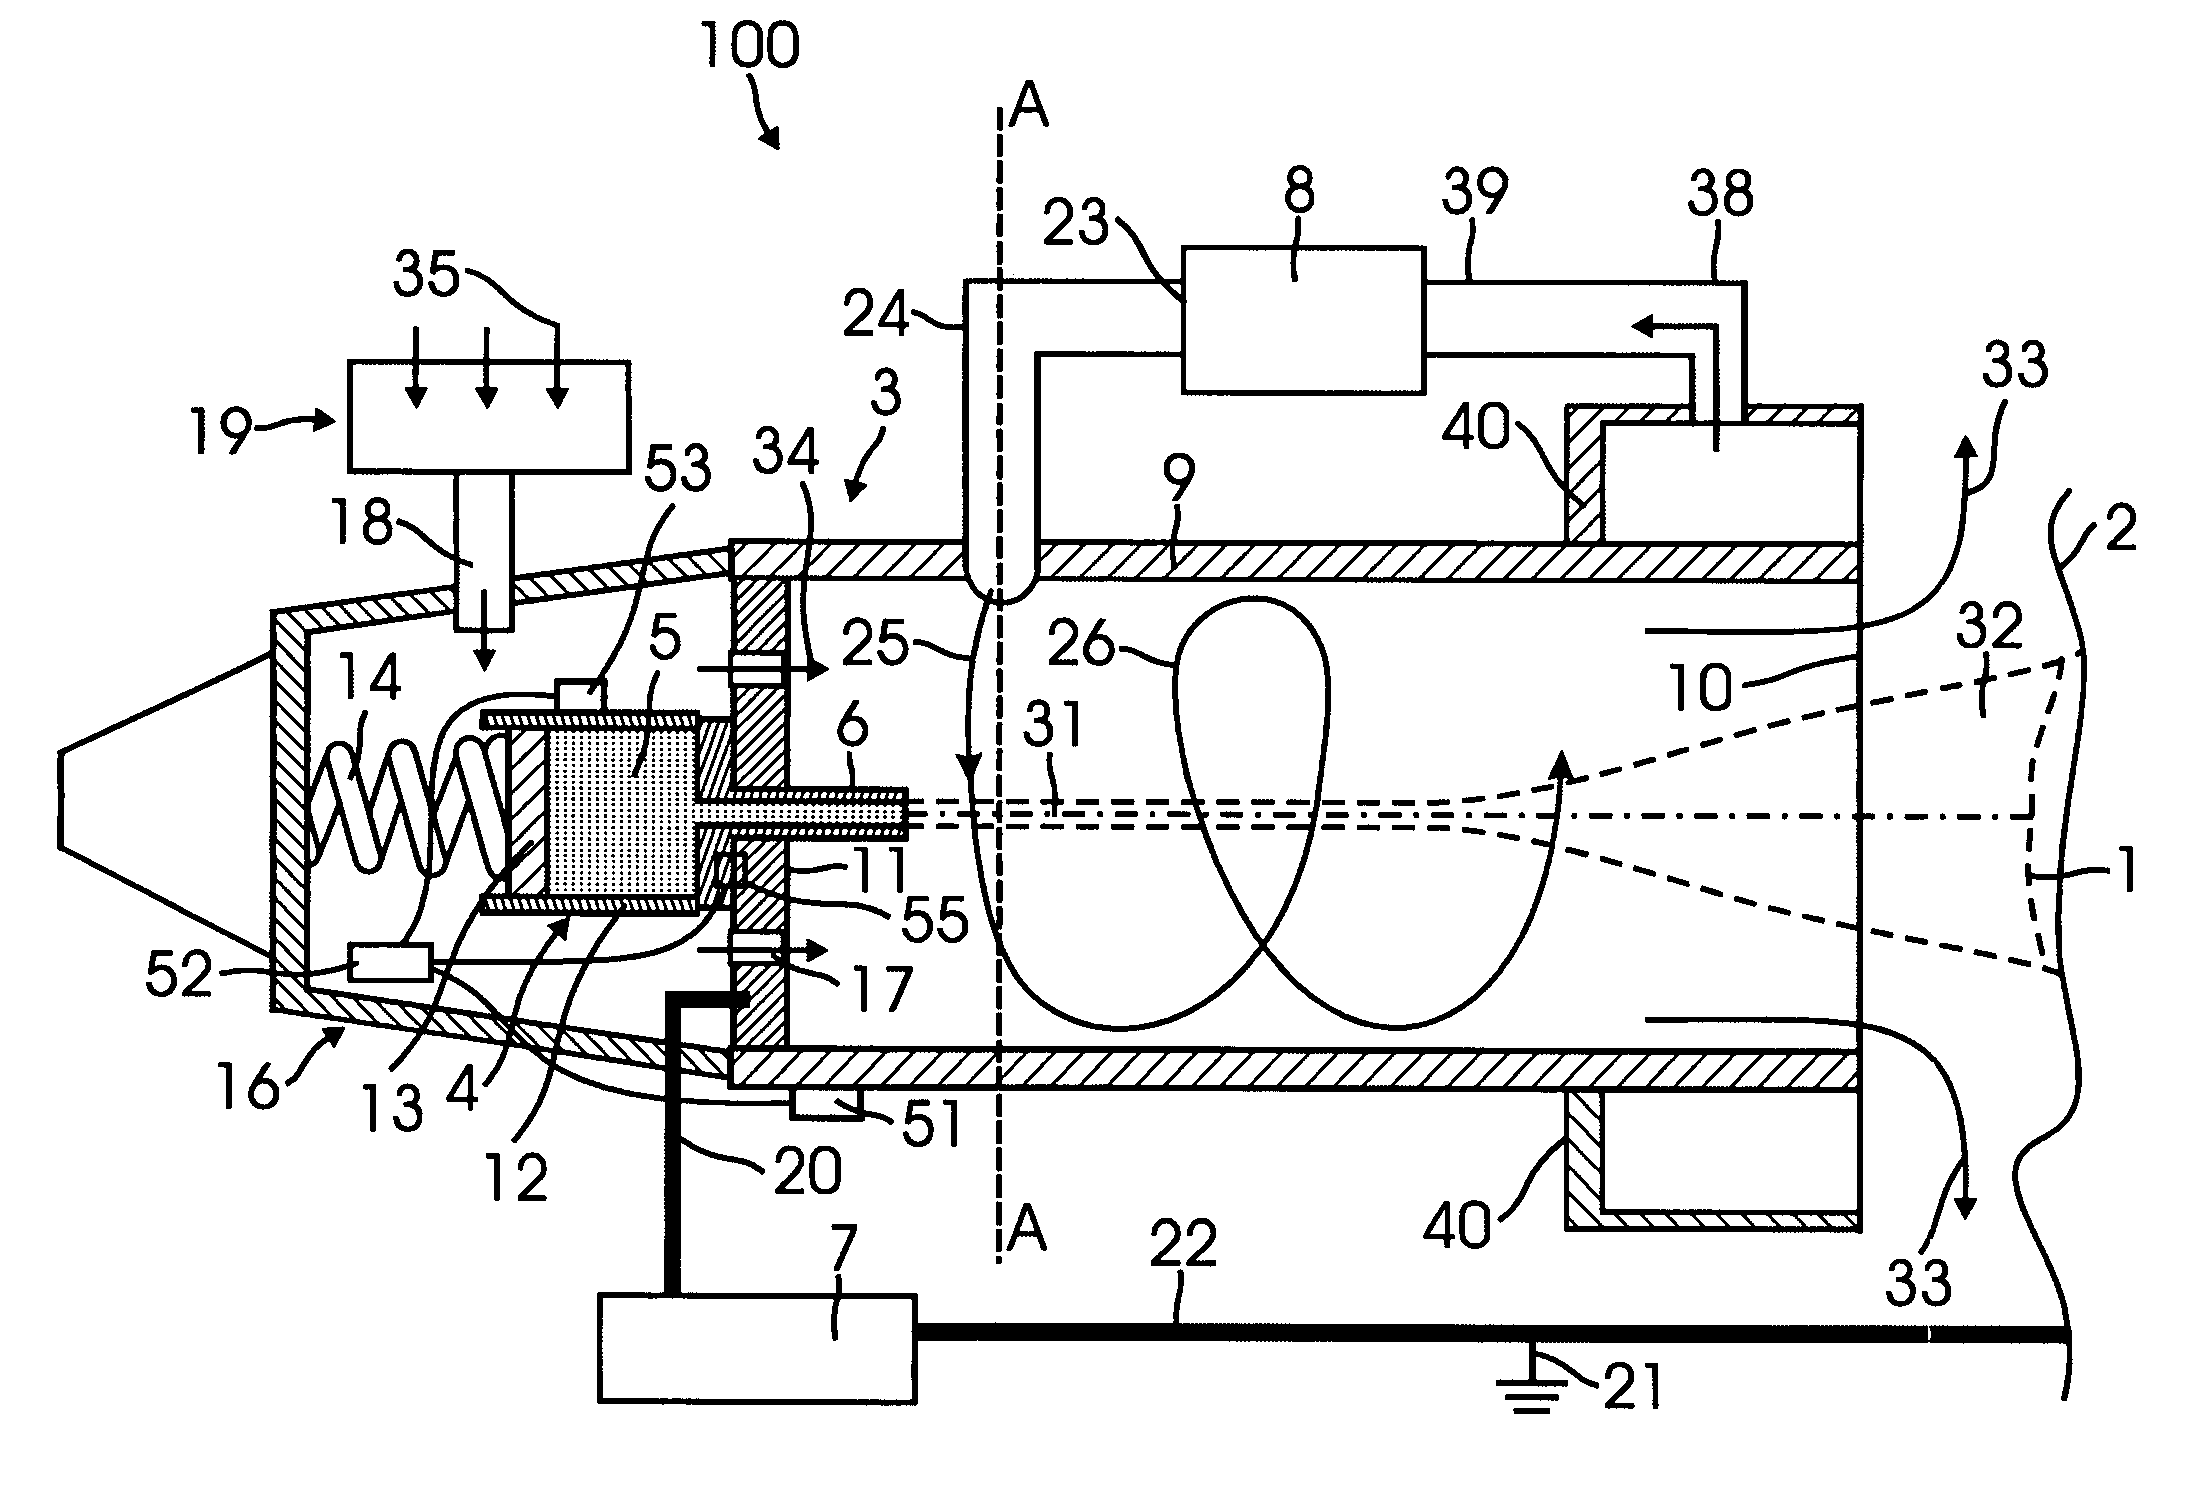 Apparatus for forming a microfiber coating